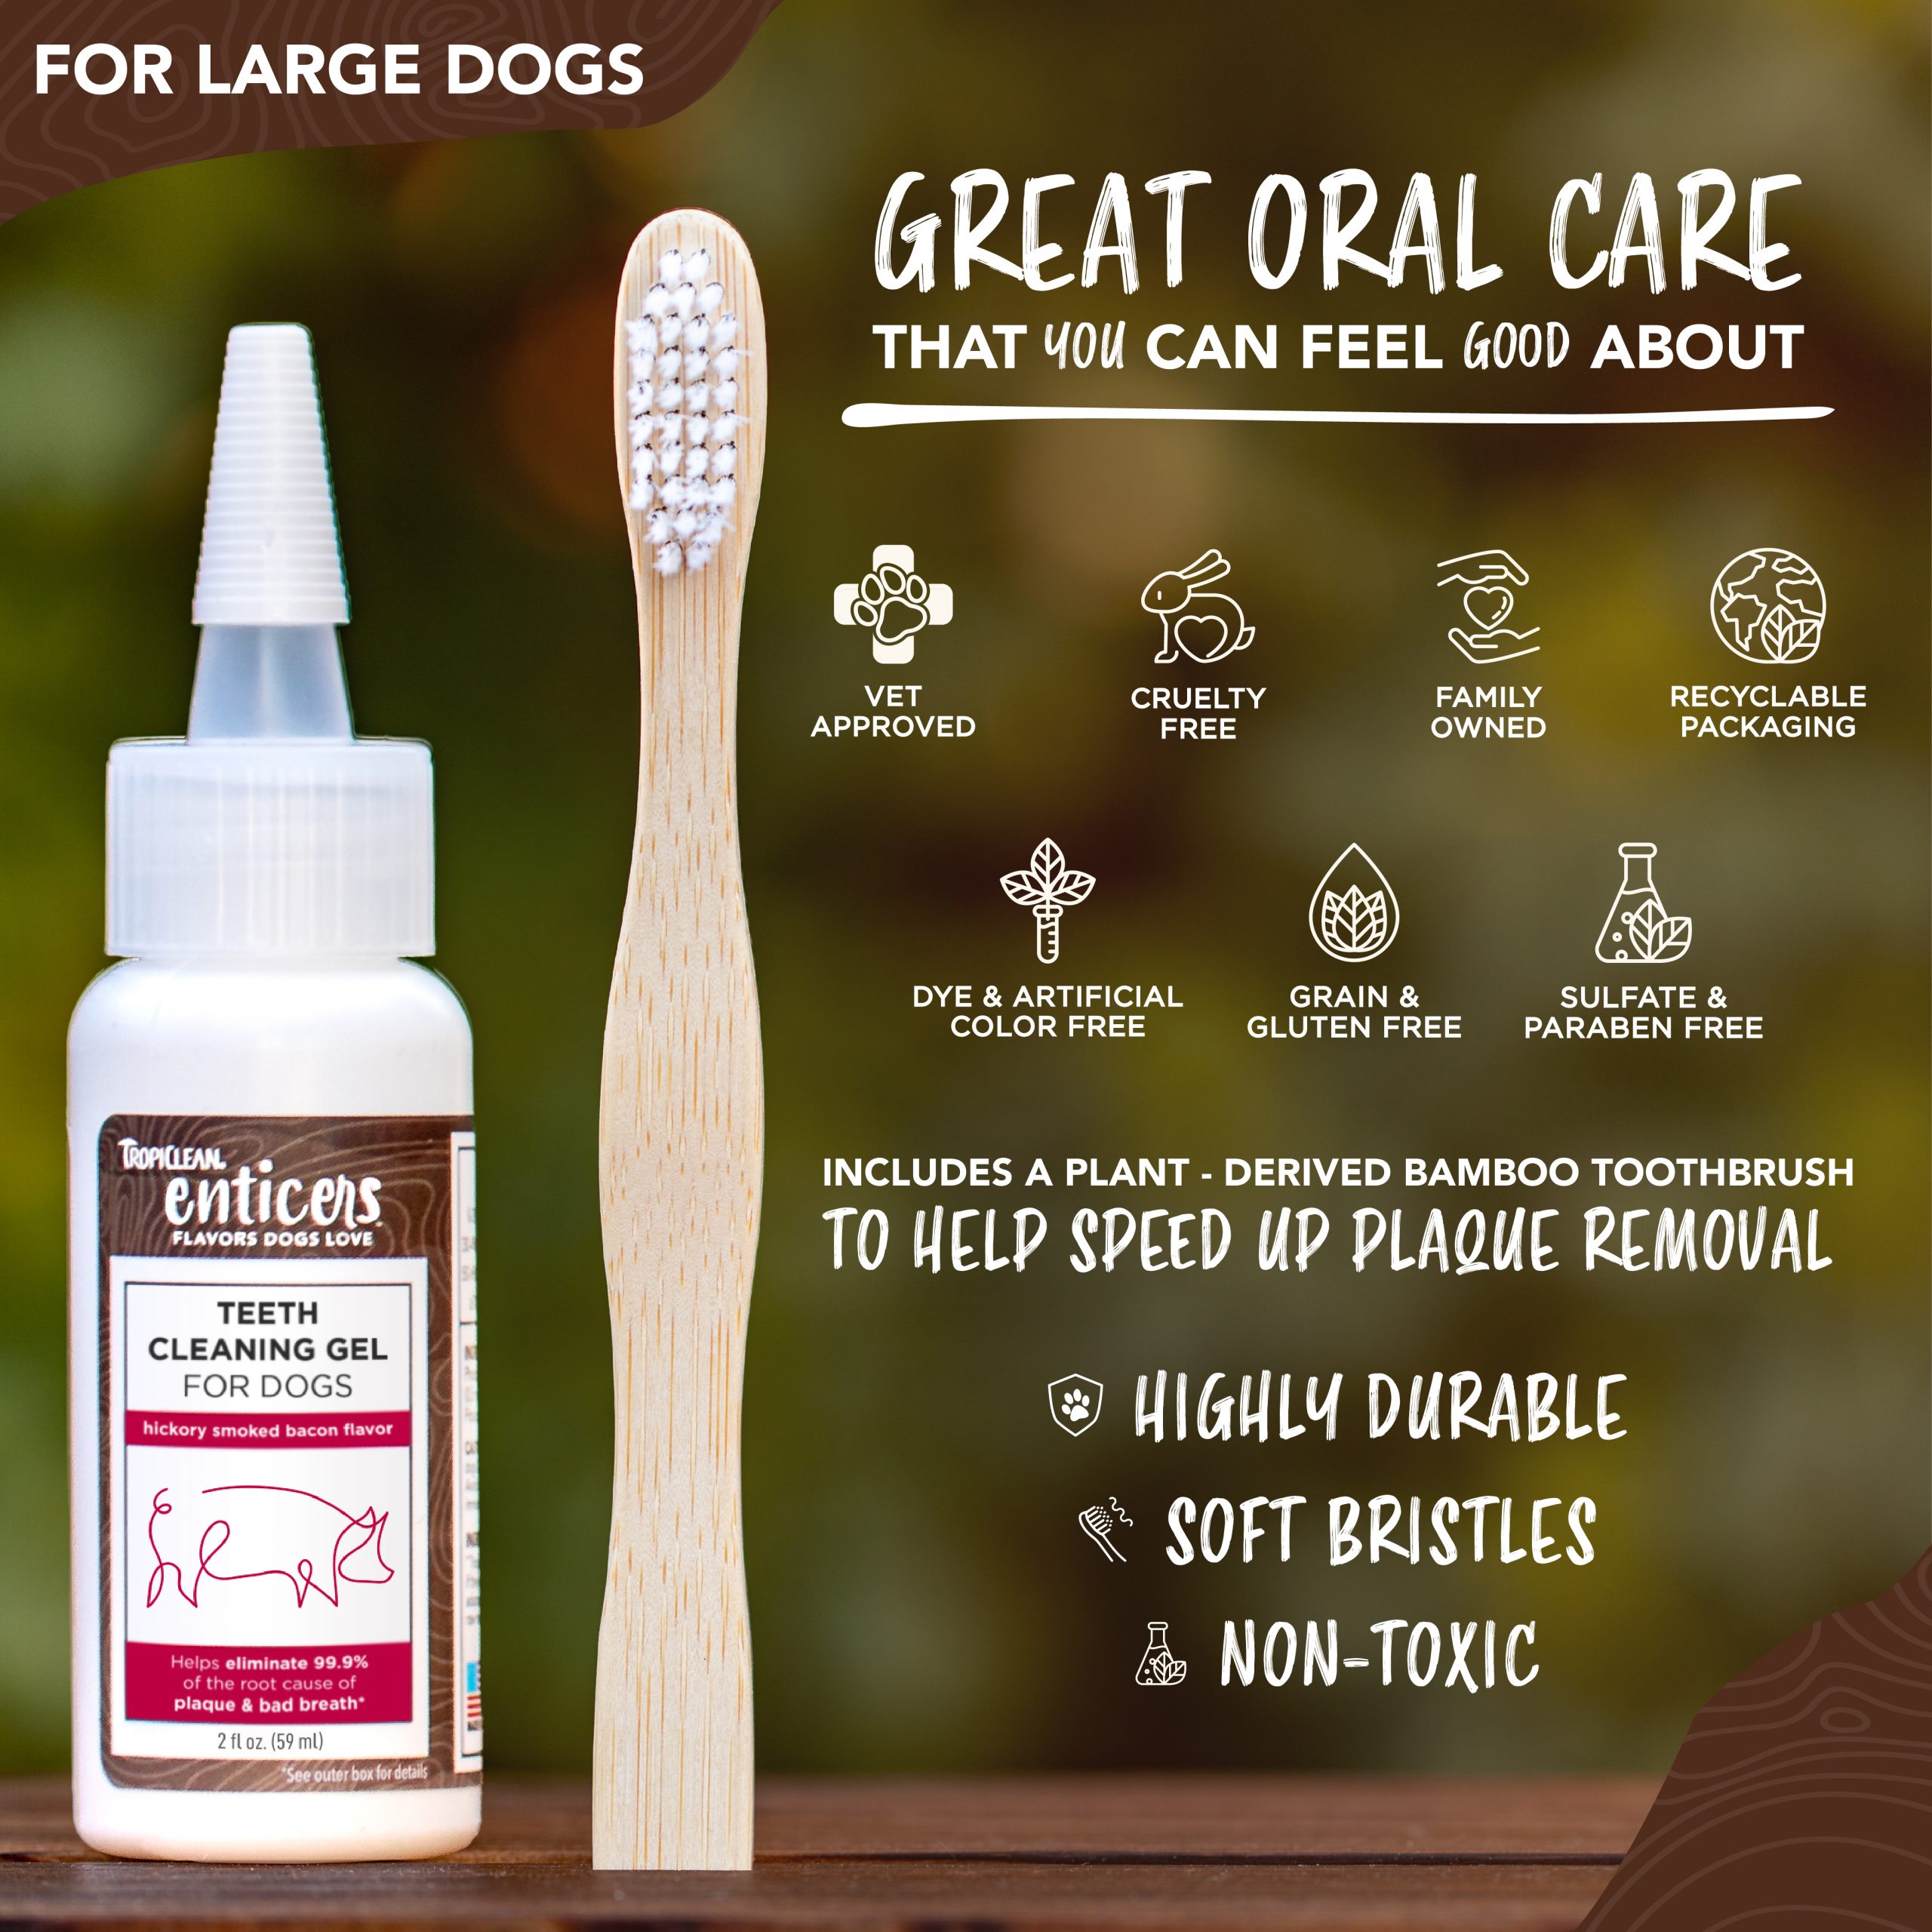 Teeth Cleaning Gel & Toothbrush for Large Dogs – Hickory Smoked Bacon Flavor